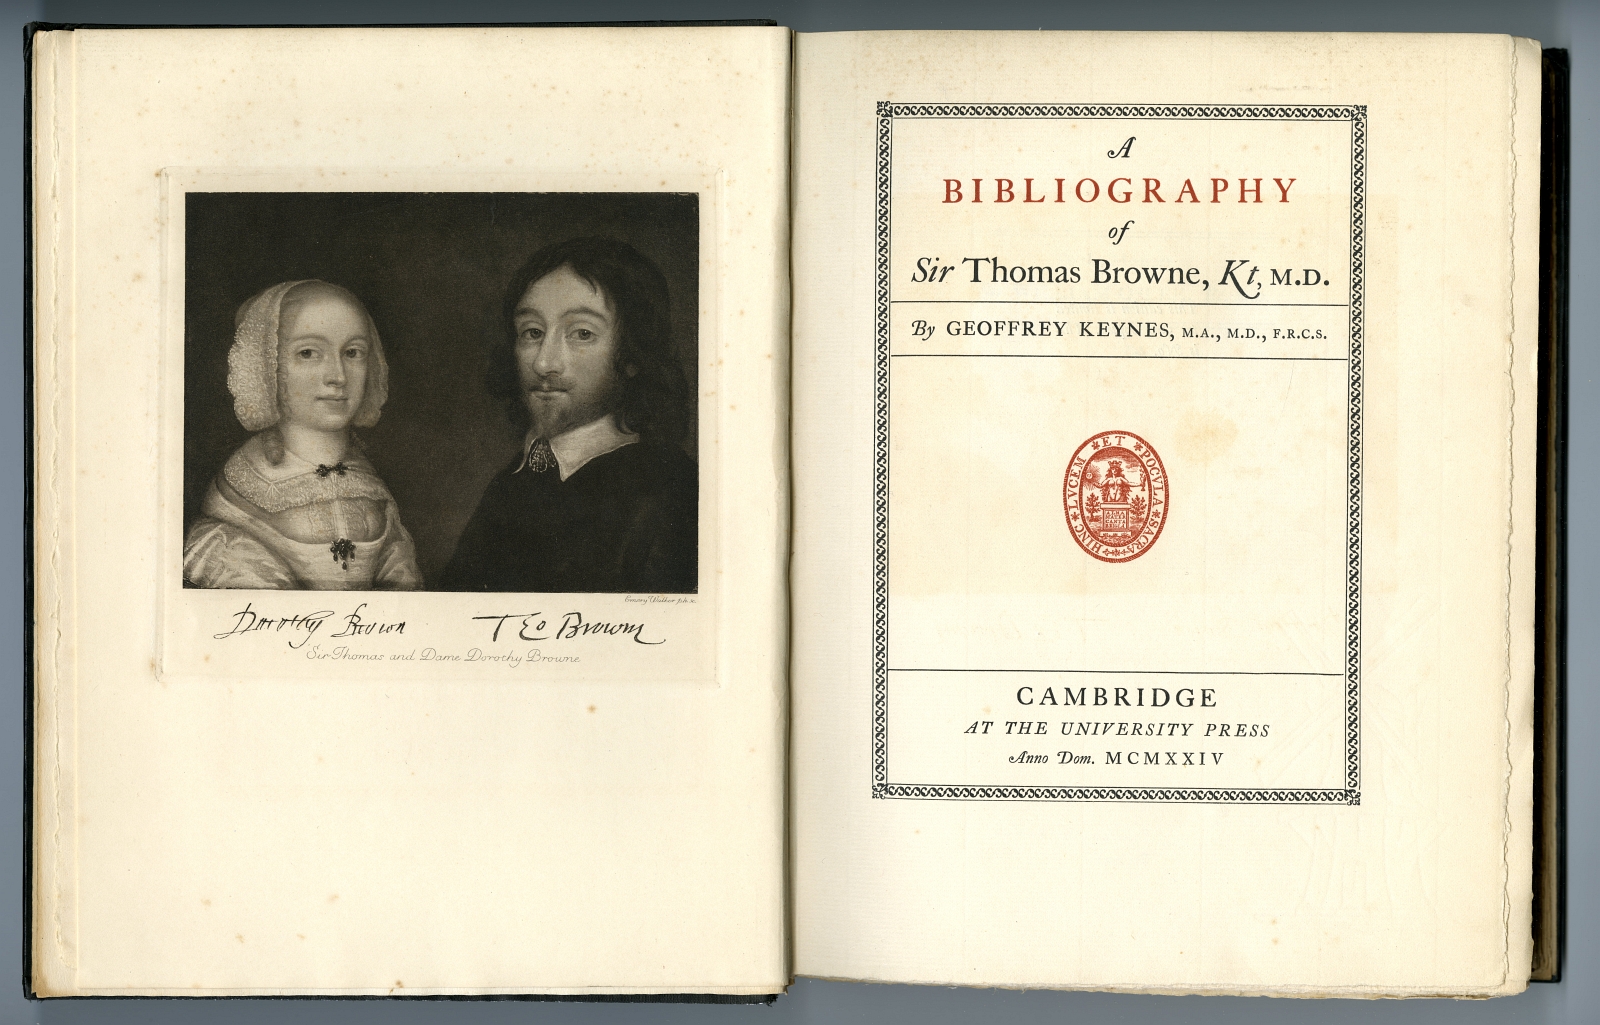 A BIBLIOGRAPHY OF SIR THOMAS BROWNE title